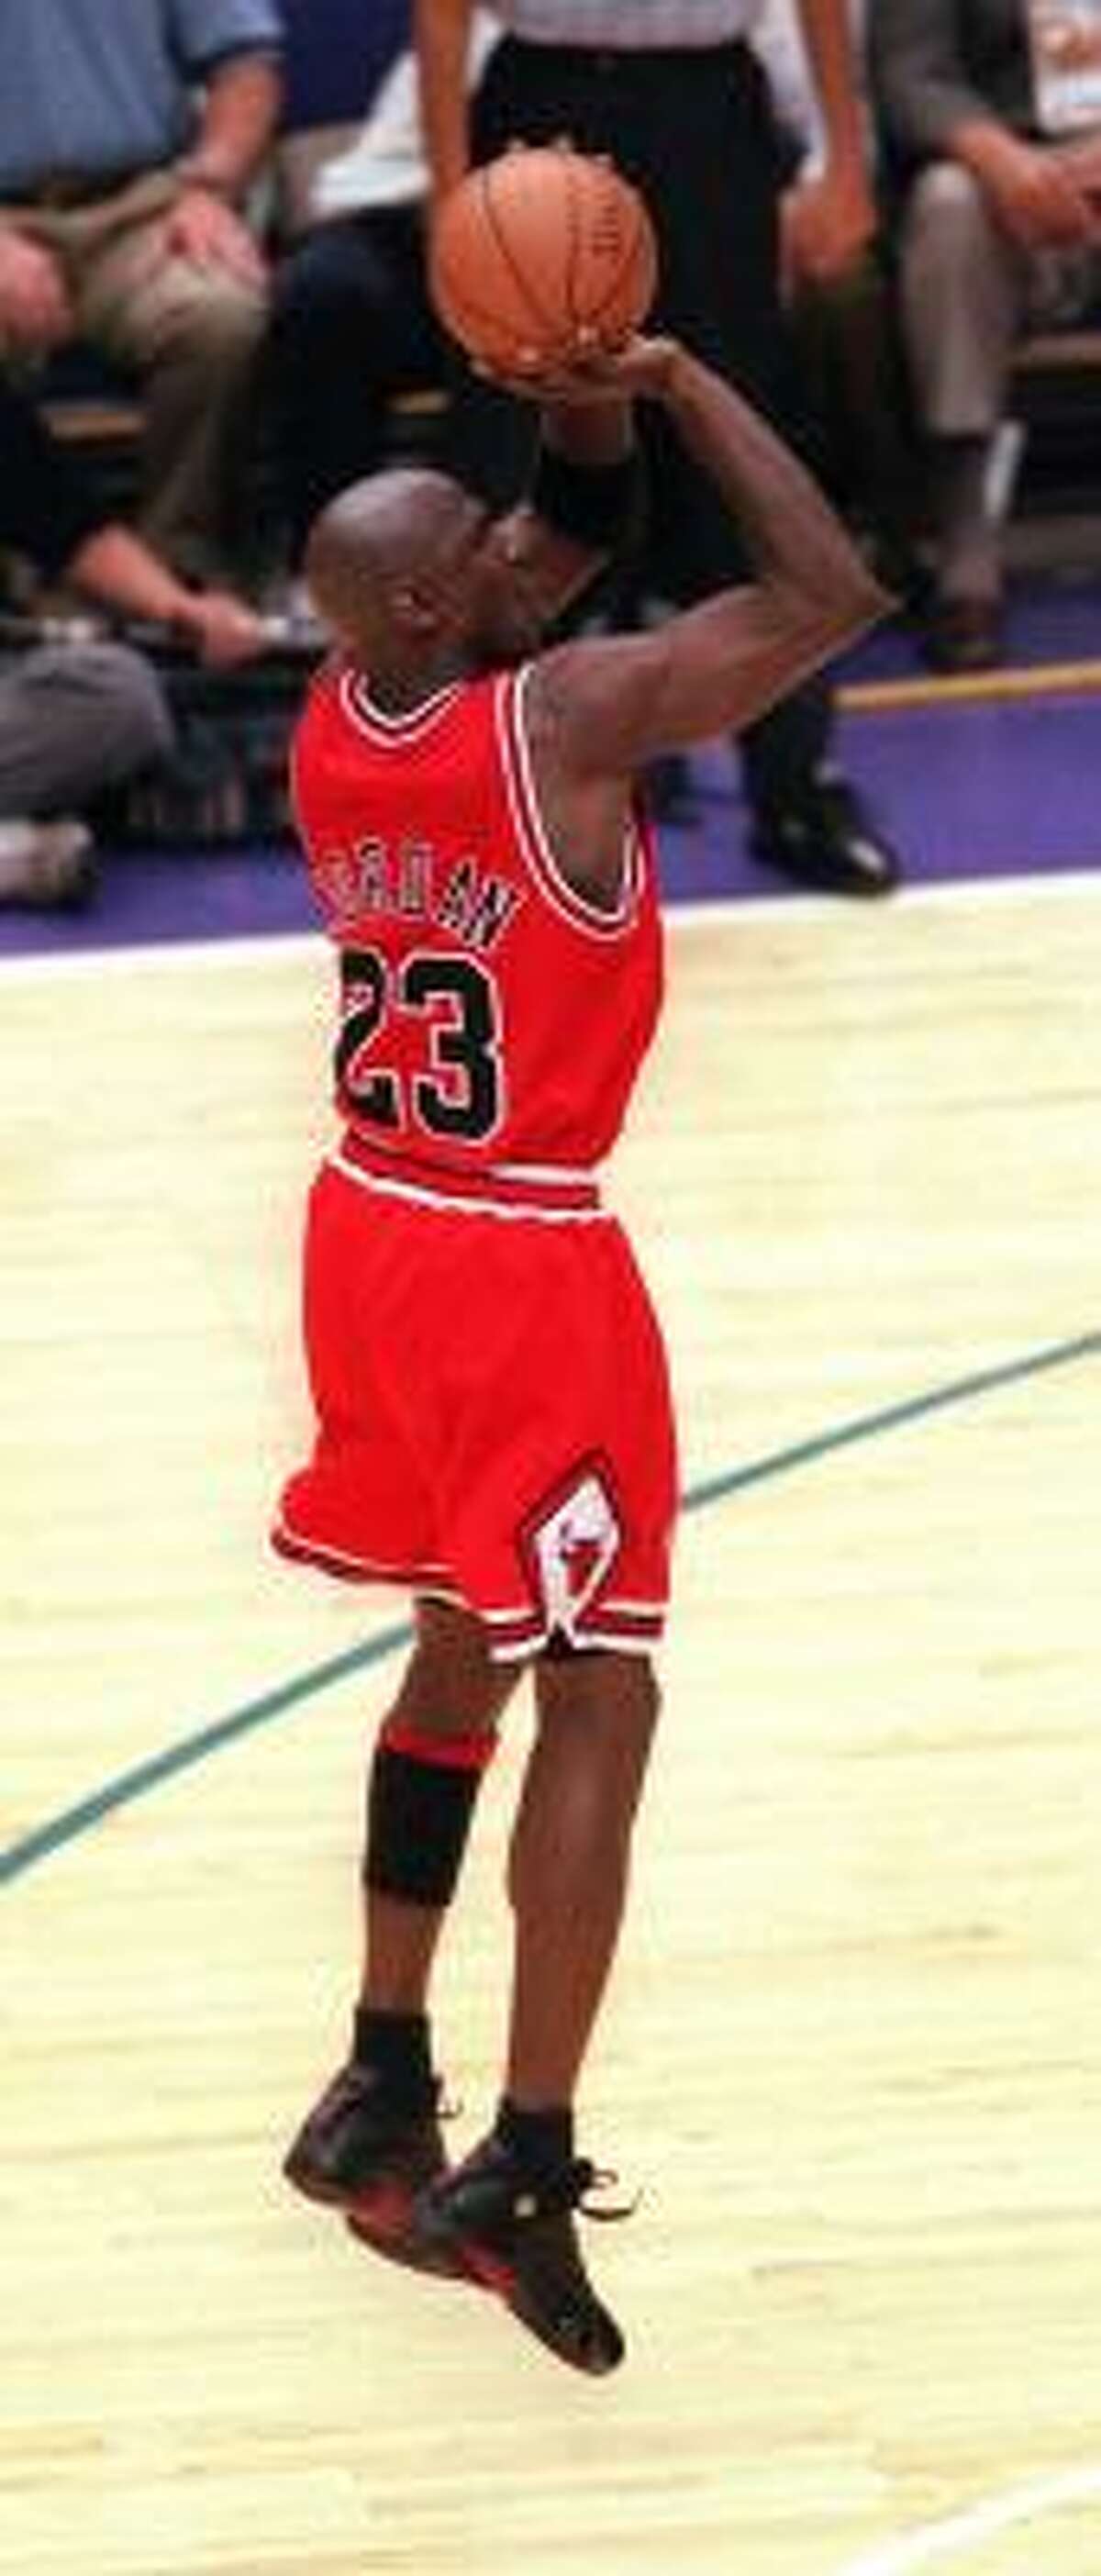 Michael Jordan, wearing the shoes that bear his name, fires in the winning shot in the 1998 NBA Finals.